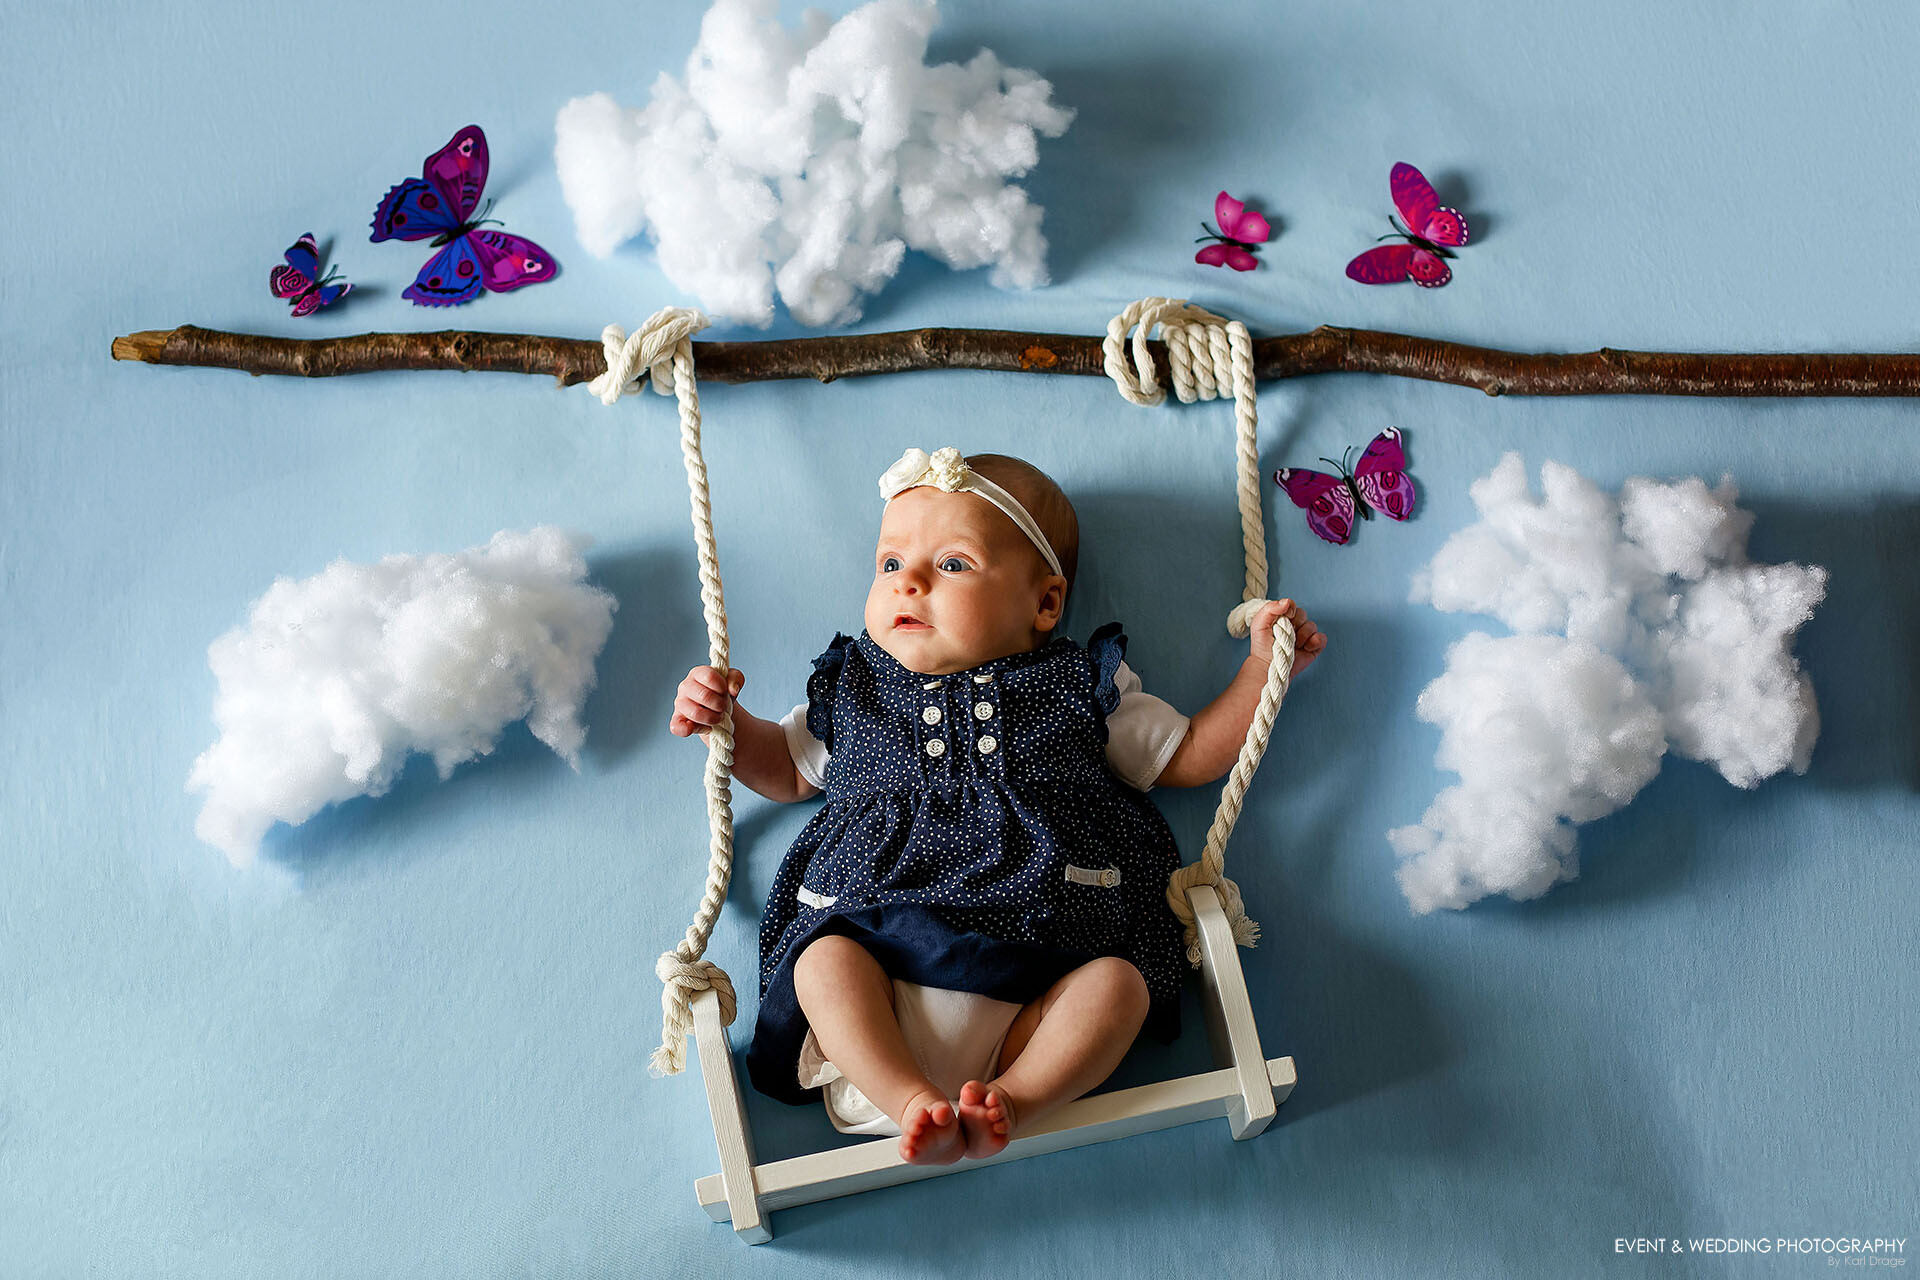 Baby Piper swings among the clouds and butterflies during her newborn photo shoot